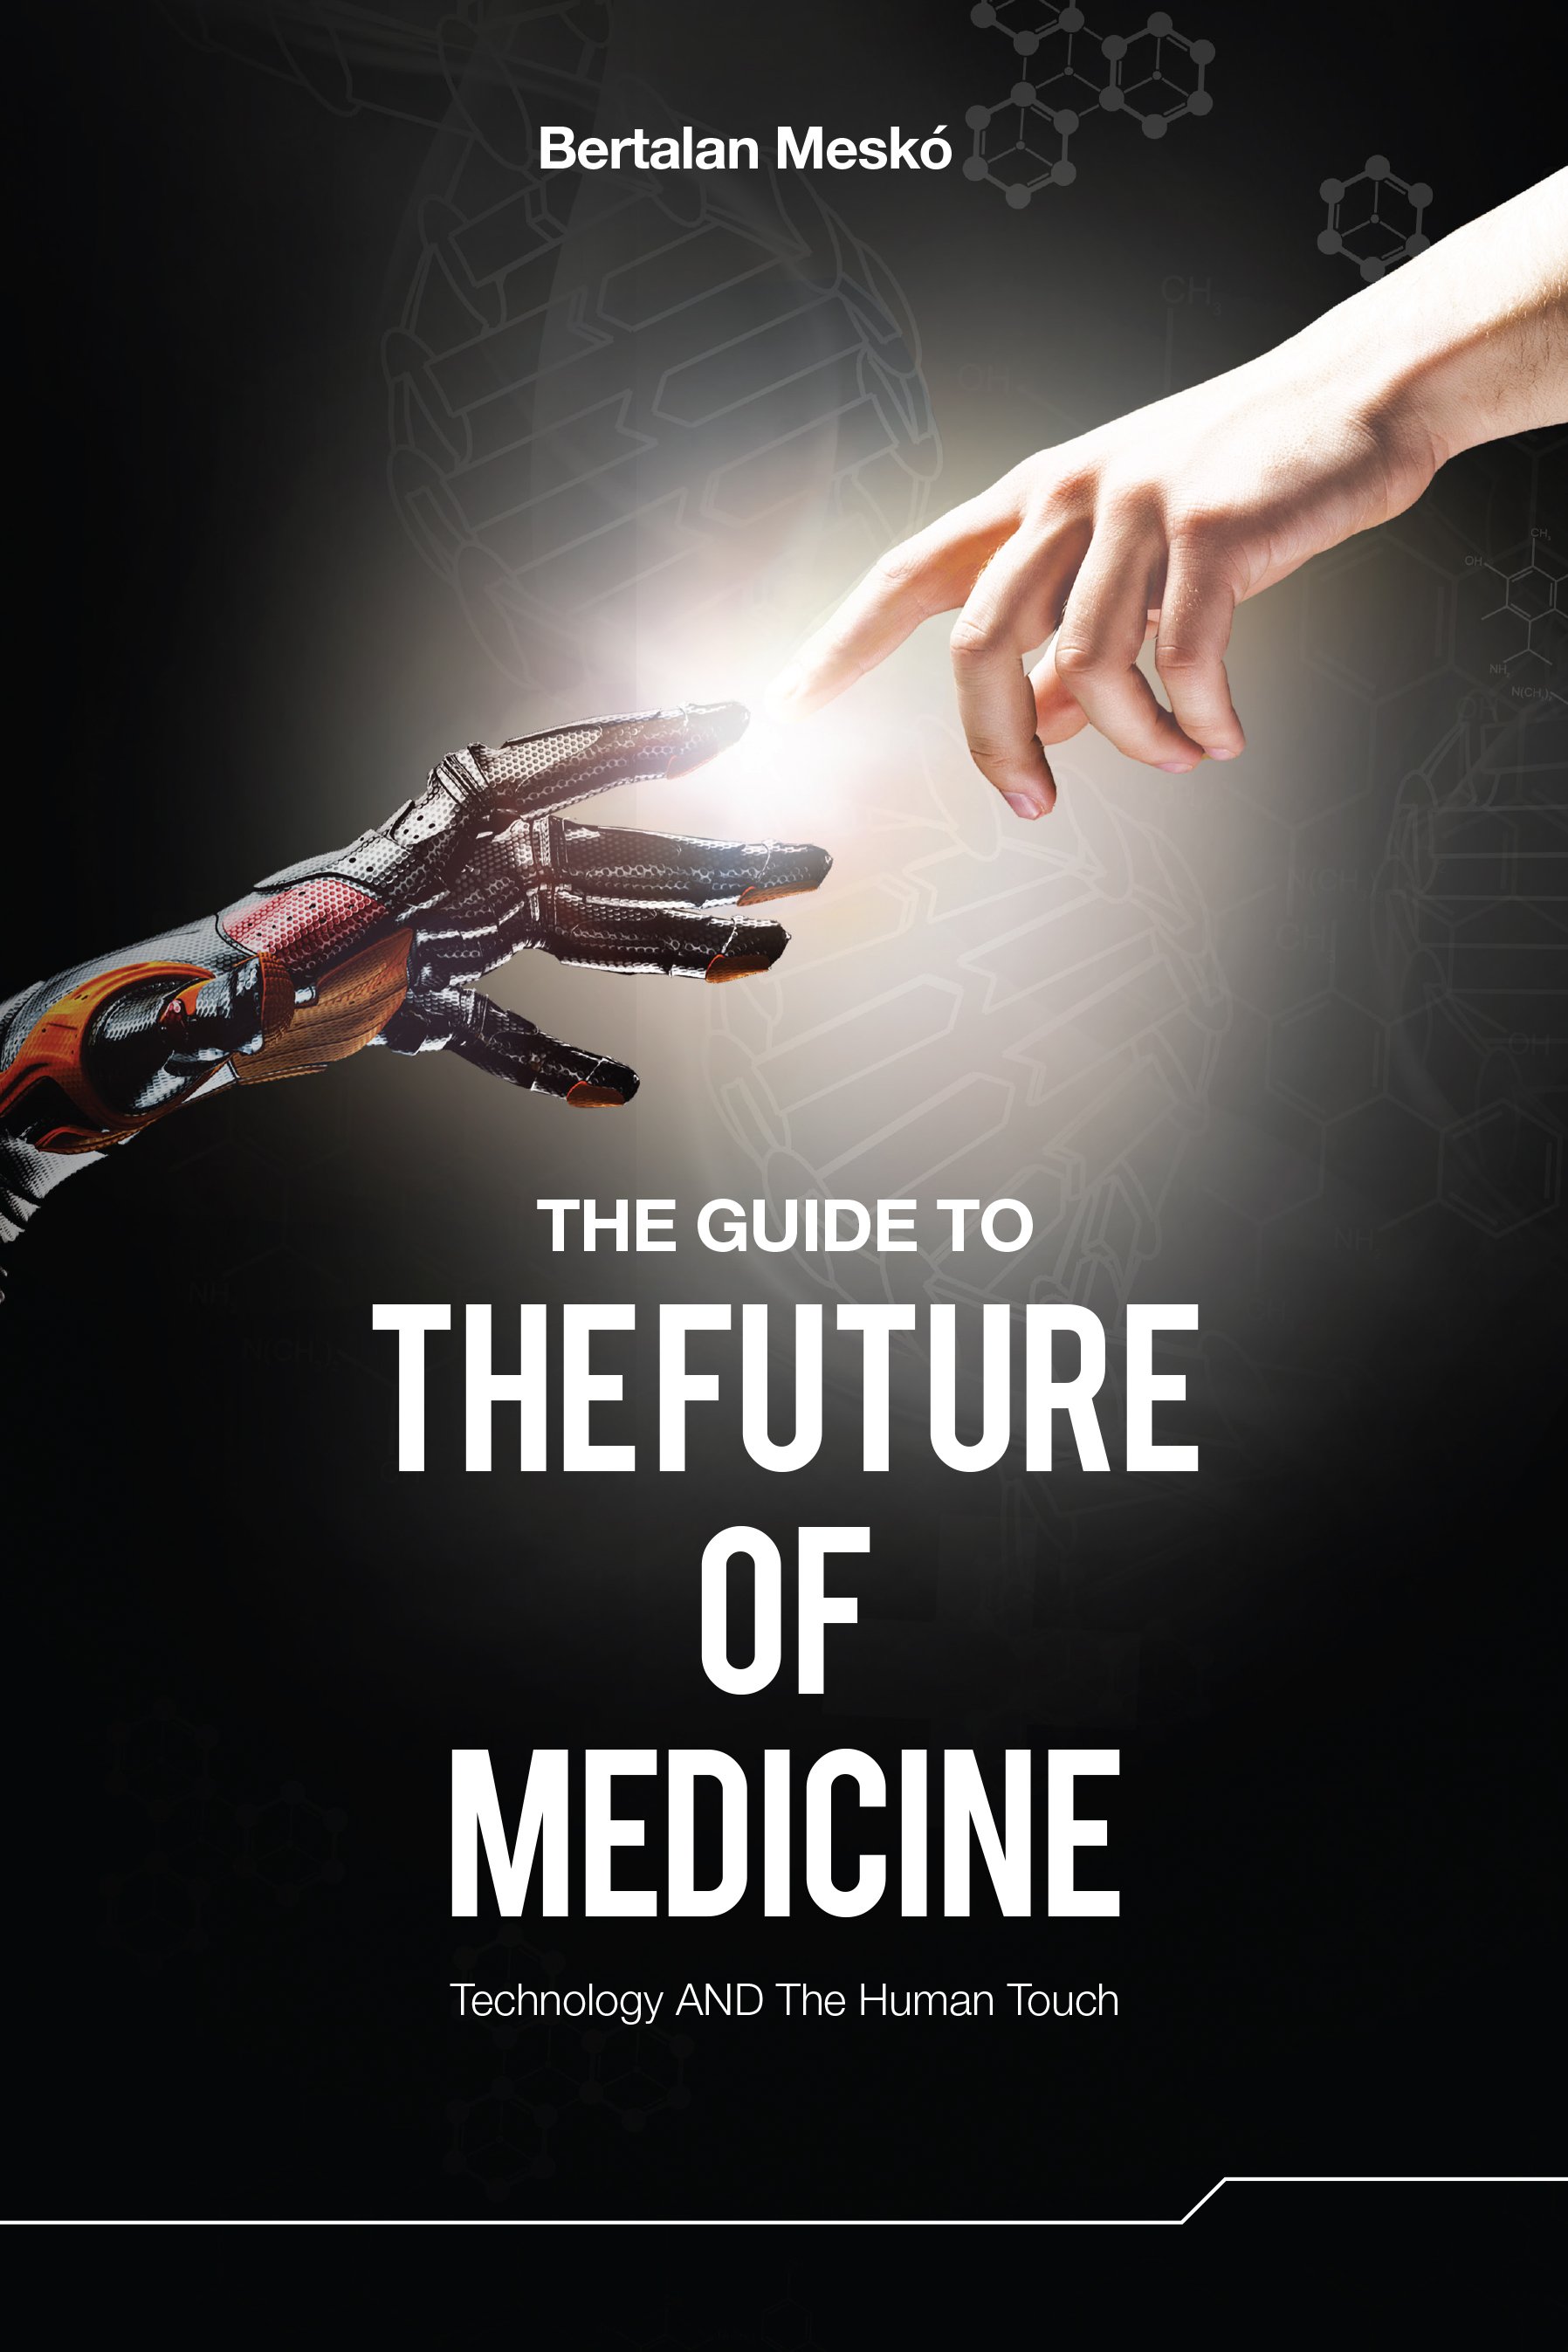 the_guide_to_the_future_of_medicine_ebook_cover_1408644510.jpg